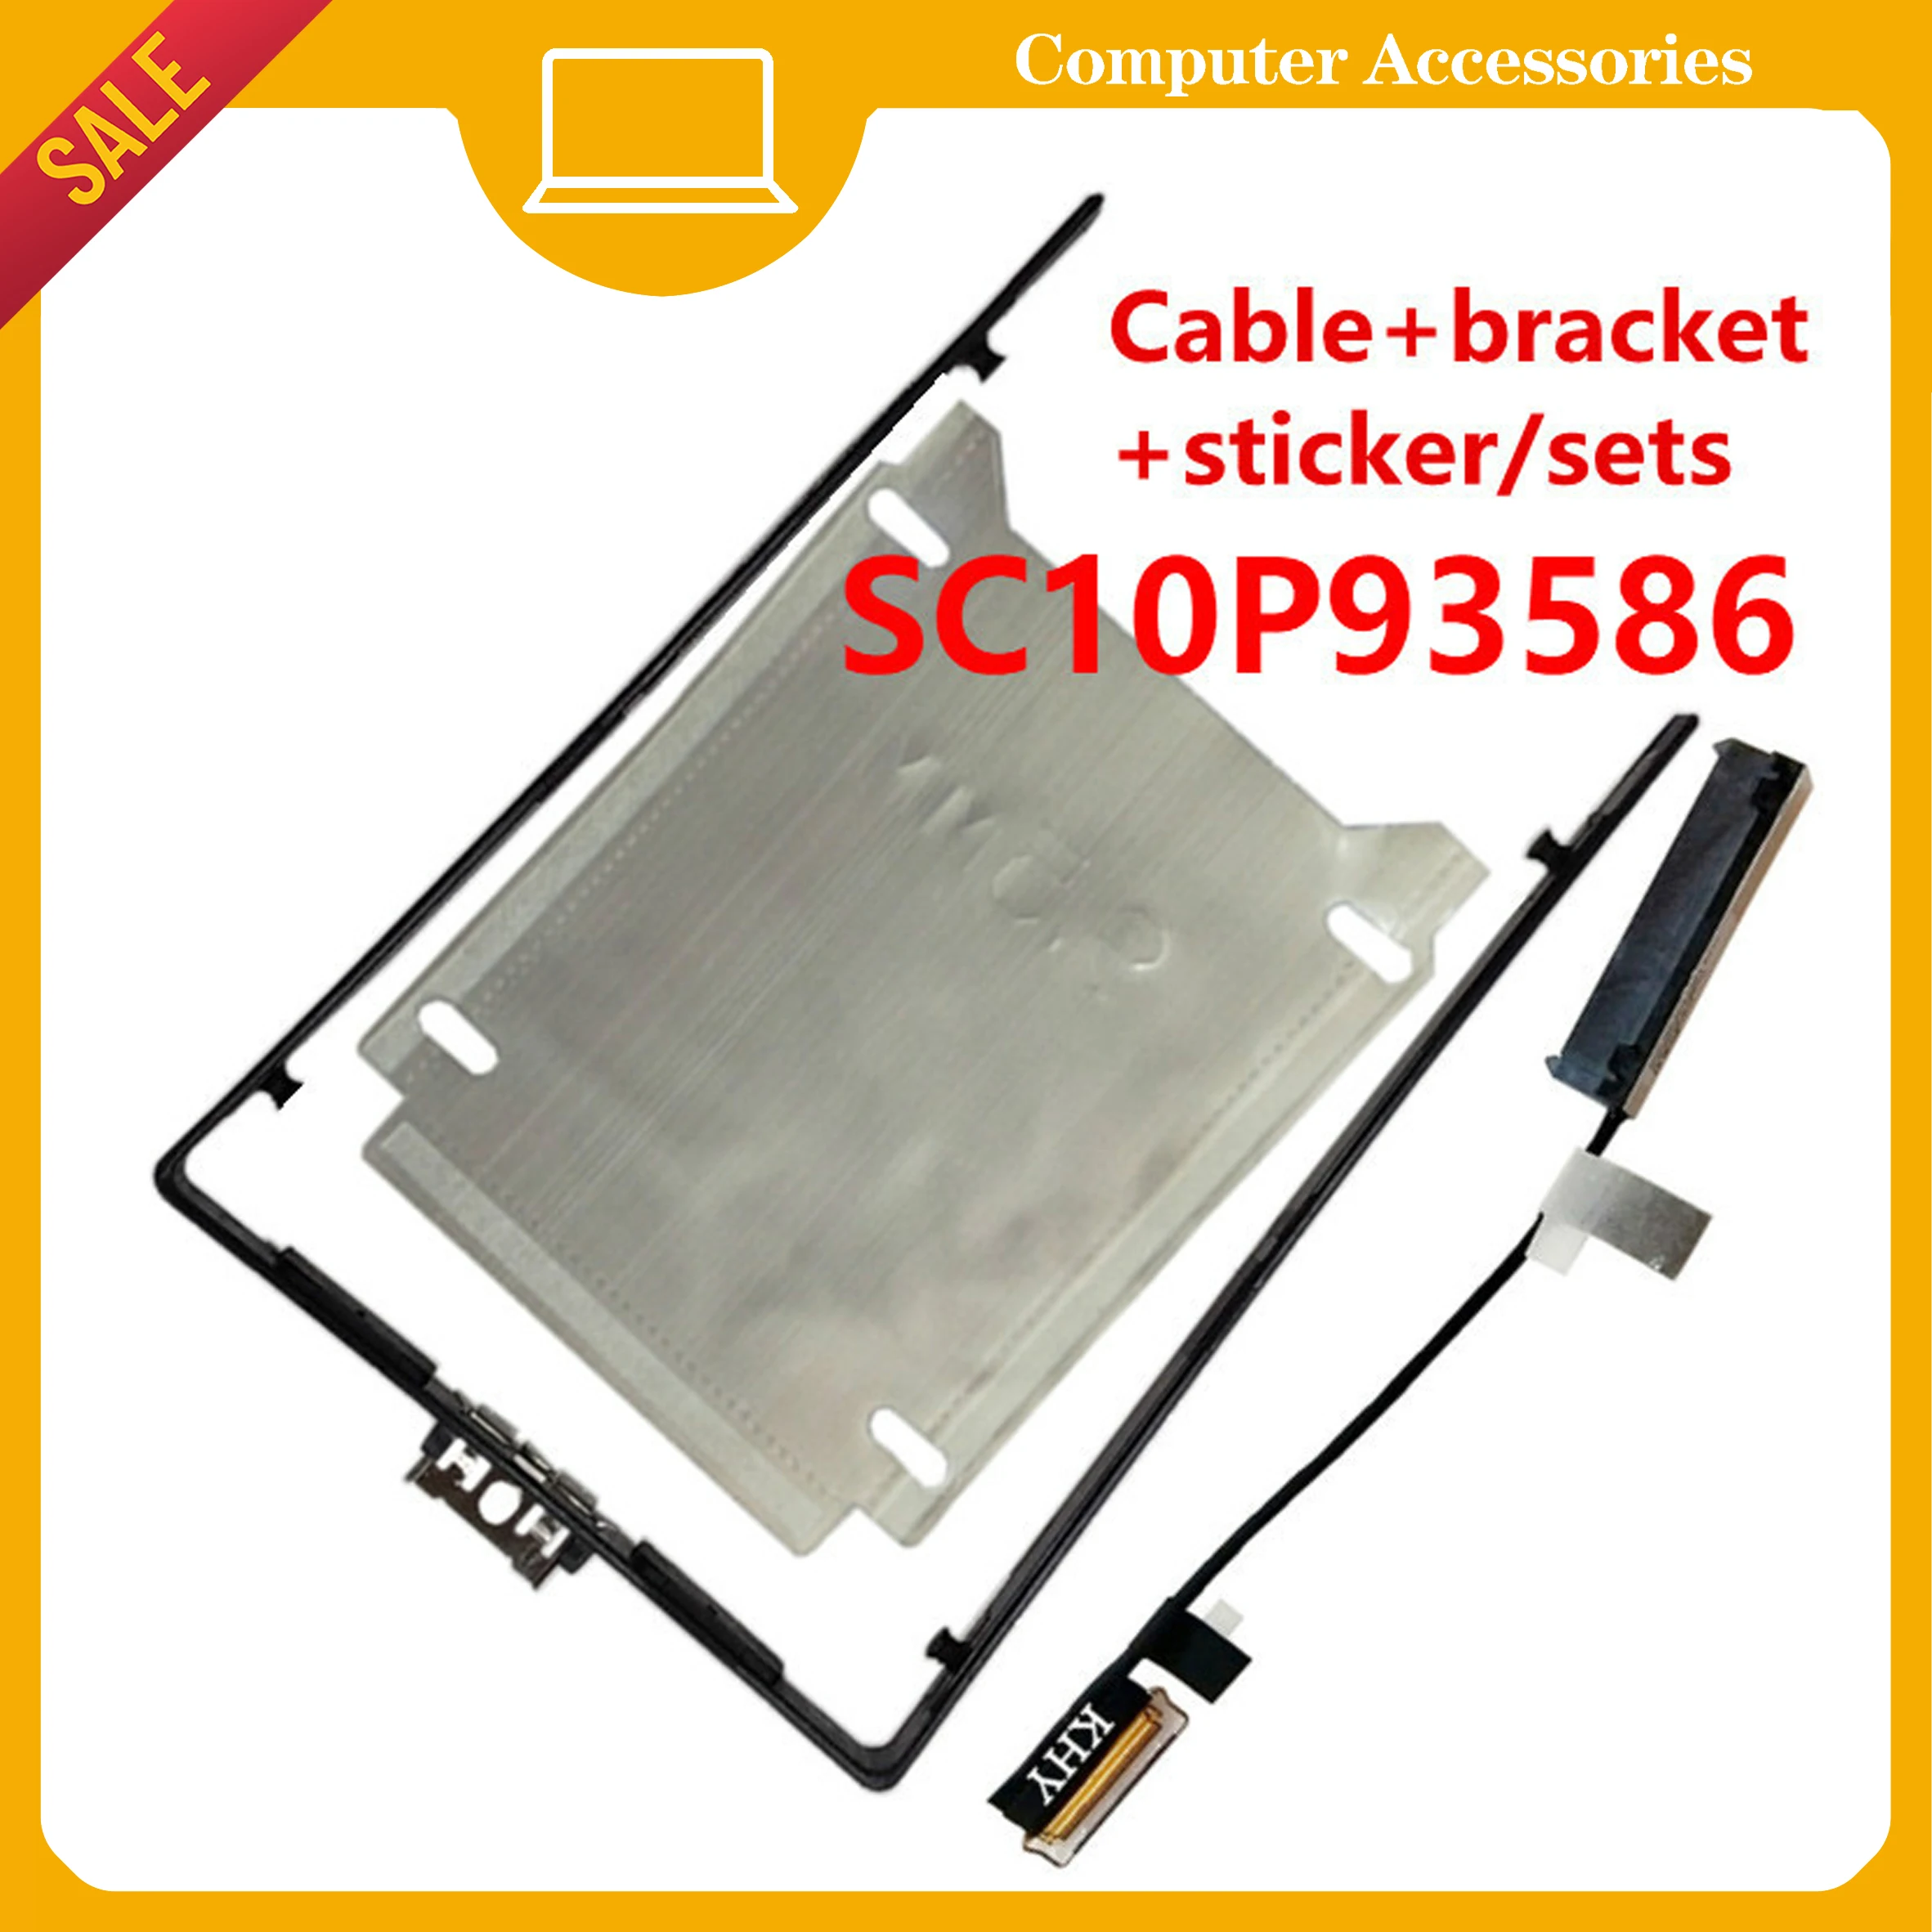 

New Original SATA HDD/SSD Cable Bracket With Cable Sticker For Thinkpad X270 A275 FRU 01HW968 01 LLV789 SC10P93586